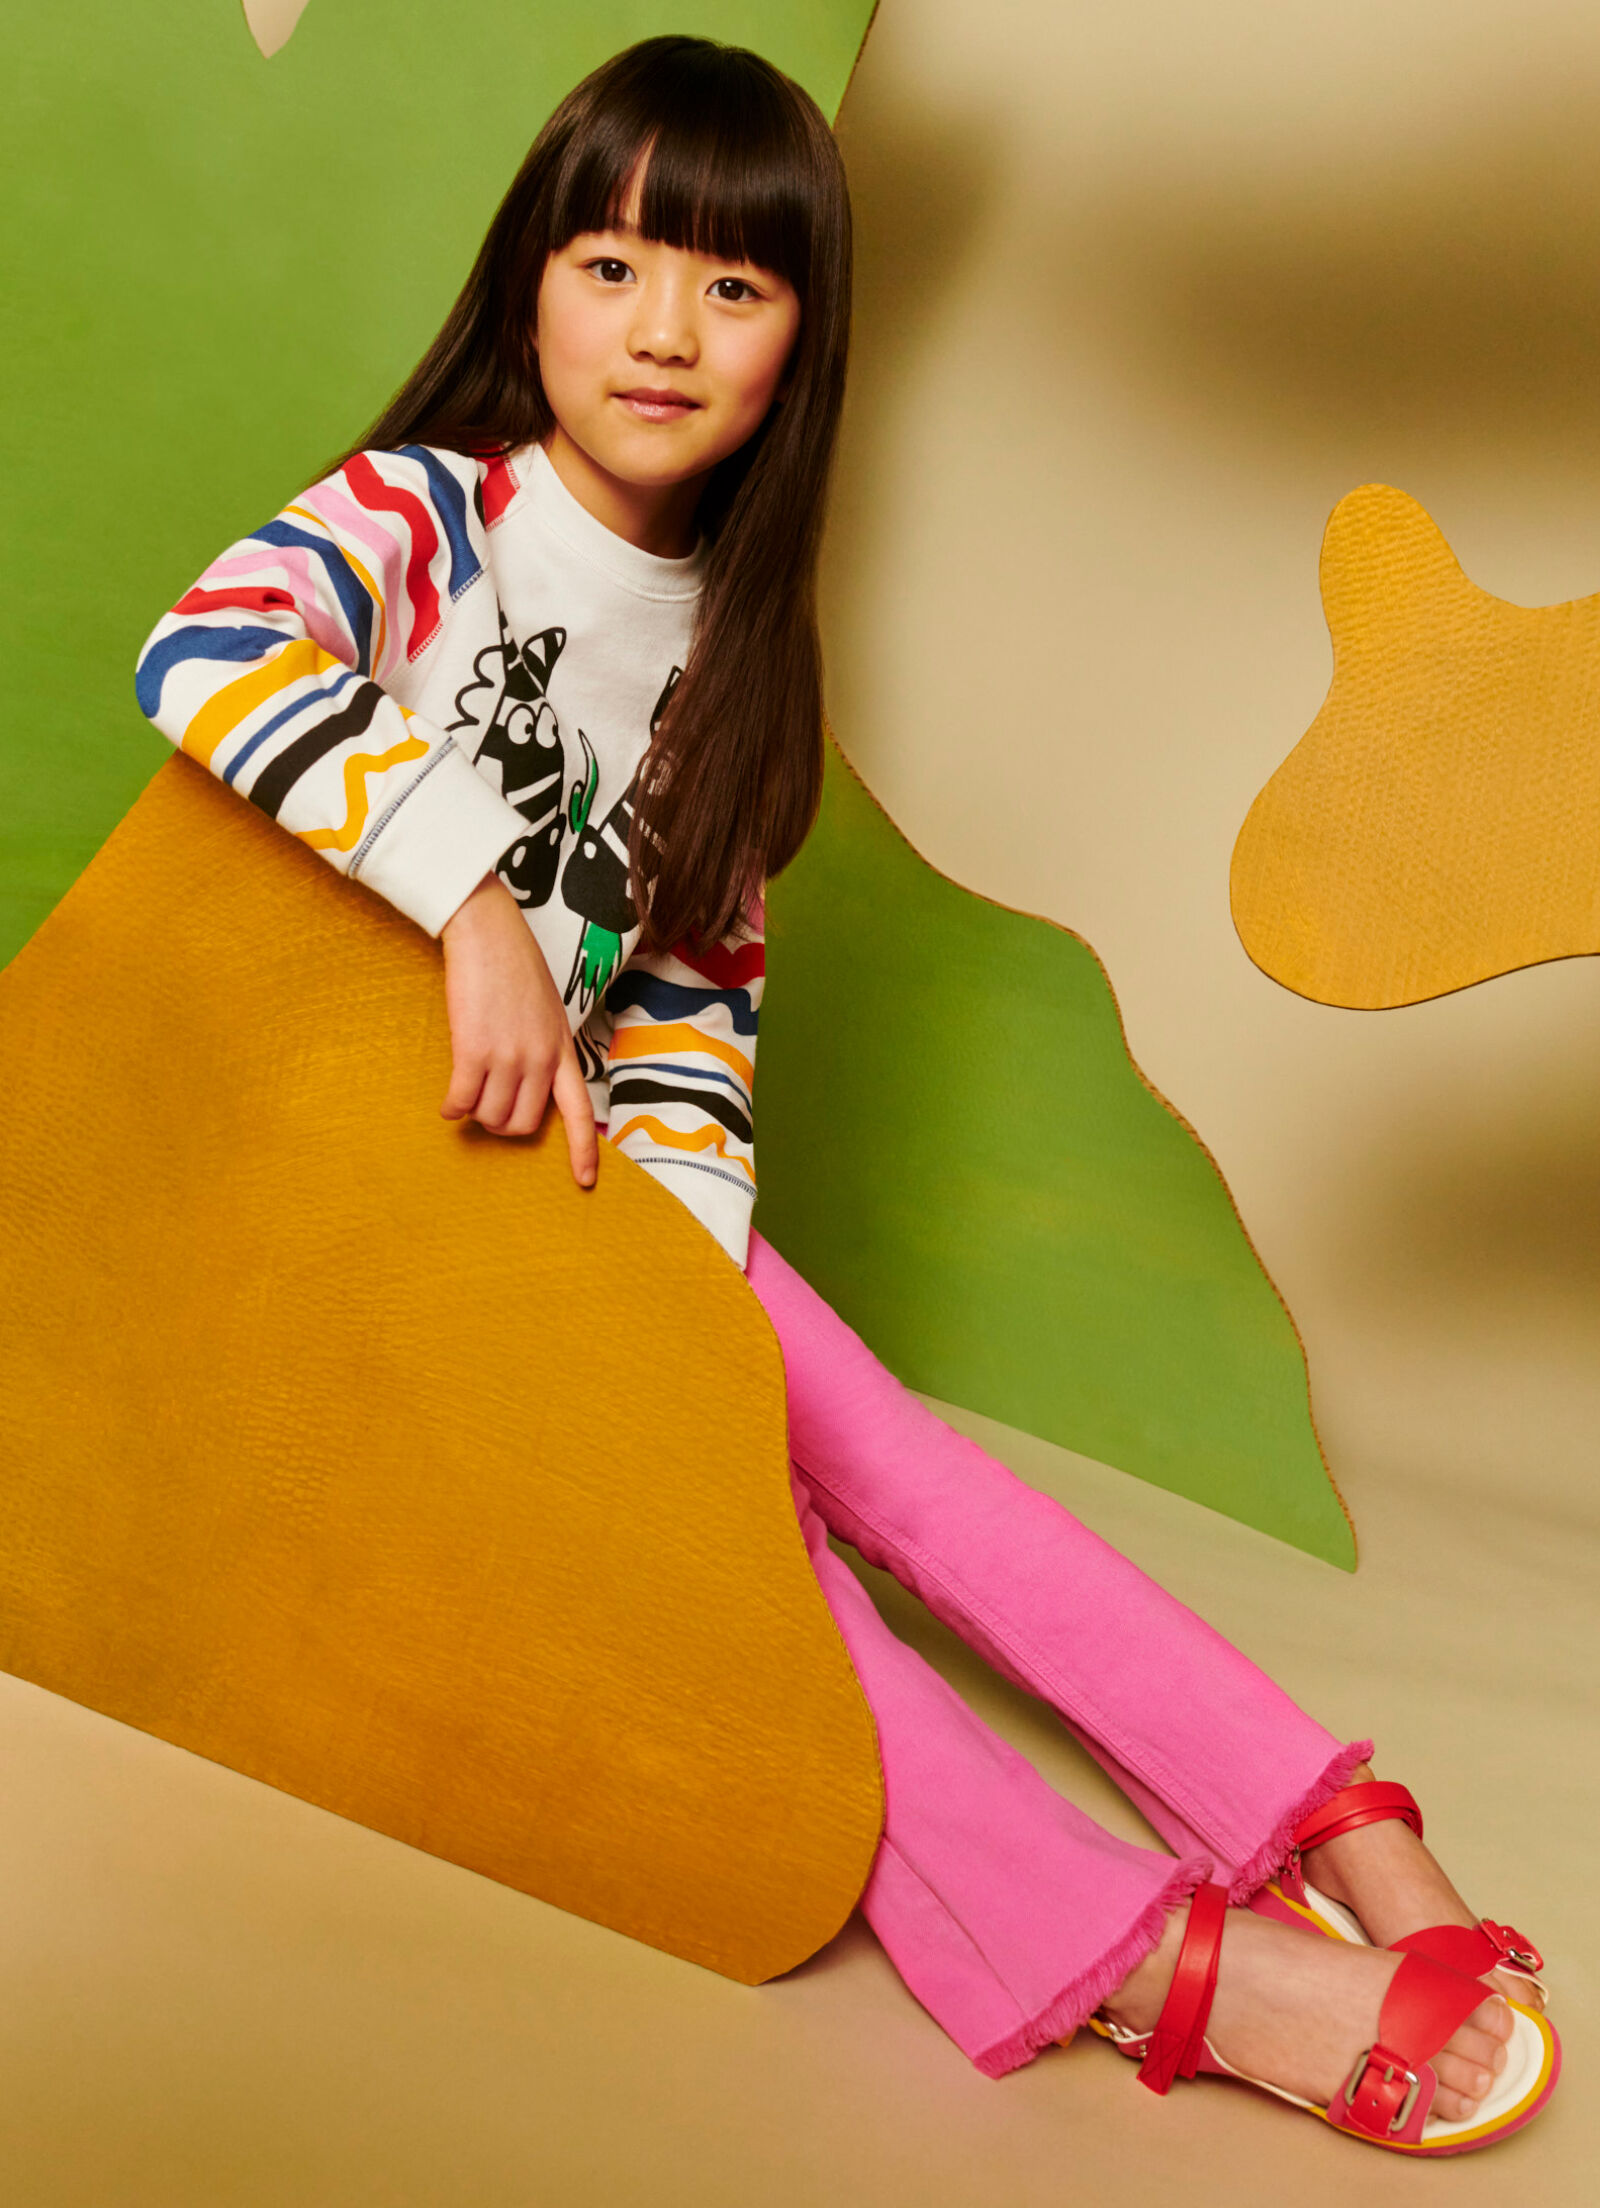 Venture into Mother Earth's beauty with Stella Kids Spring Summer 2022